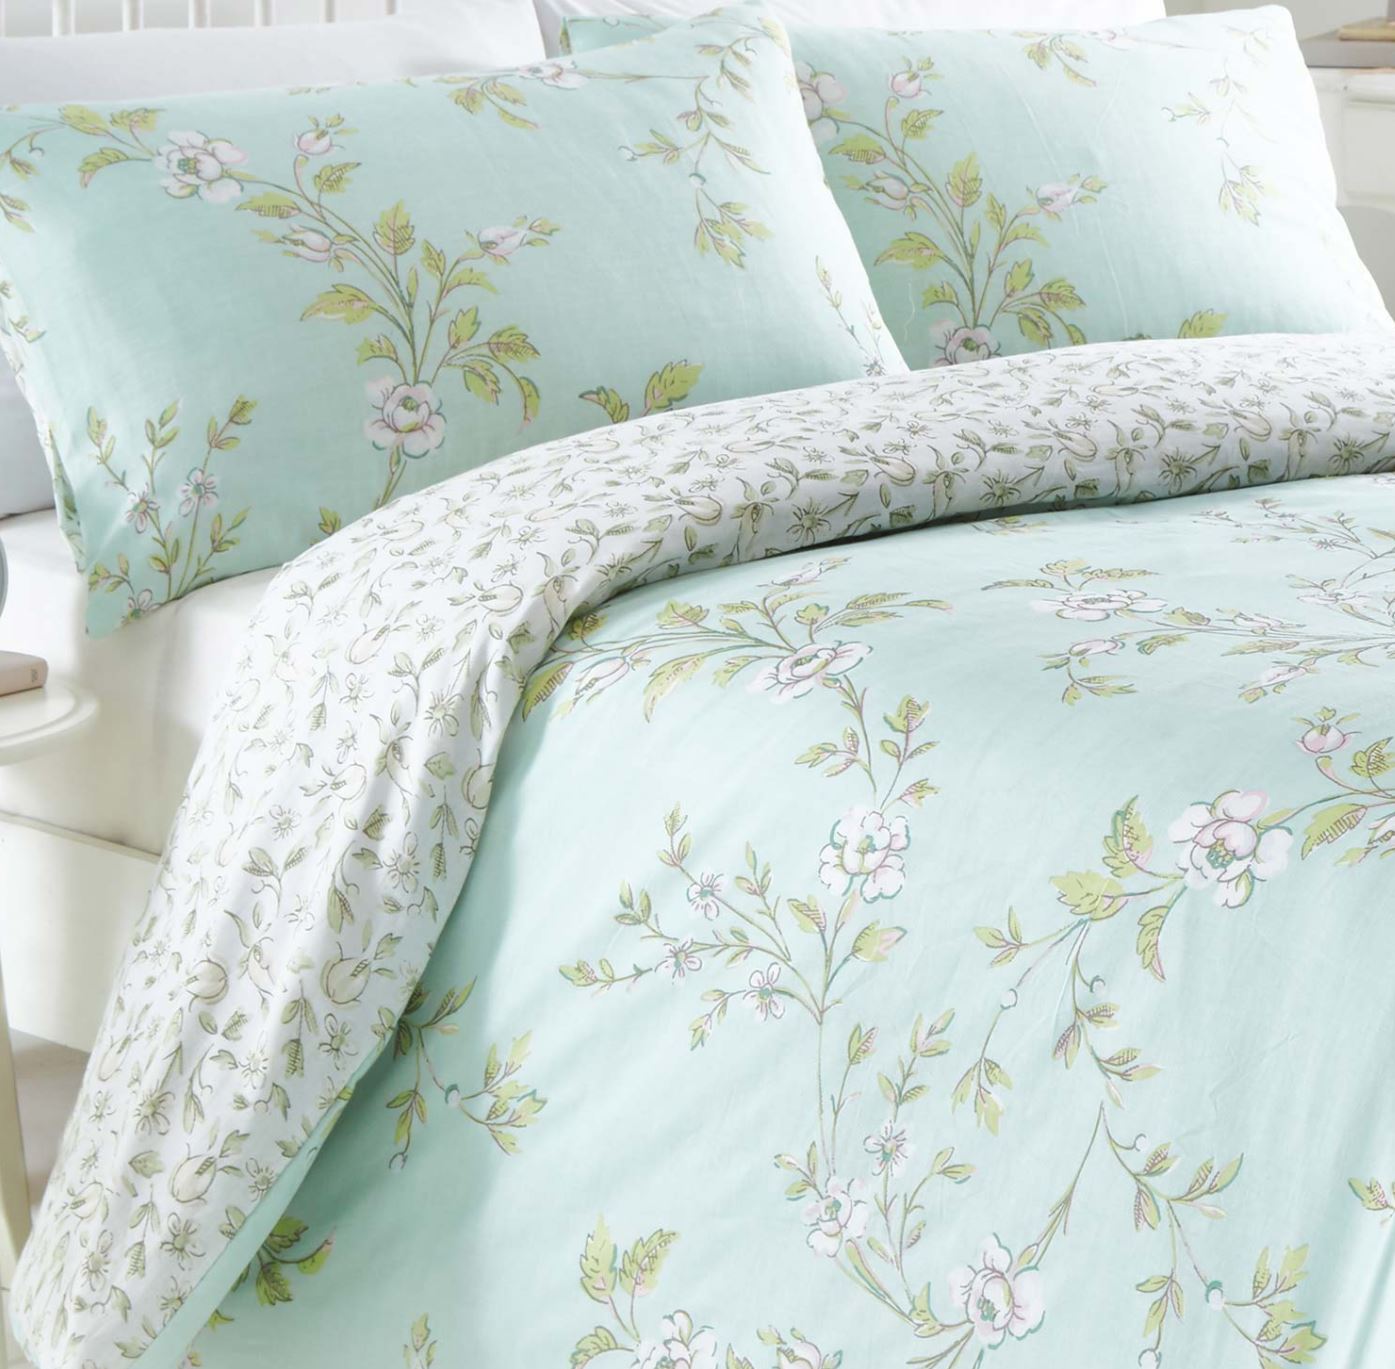 Featuring classic painted flower blossoms in subtle shades of duck egg blue and green